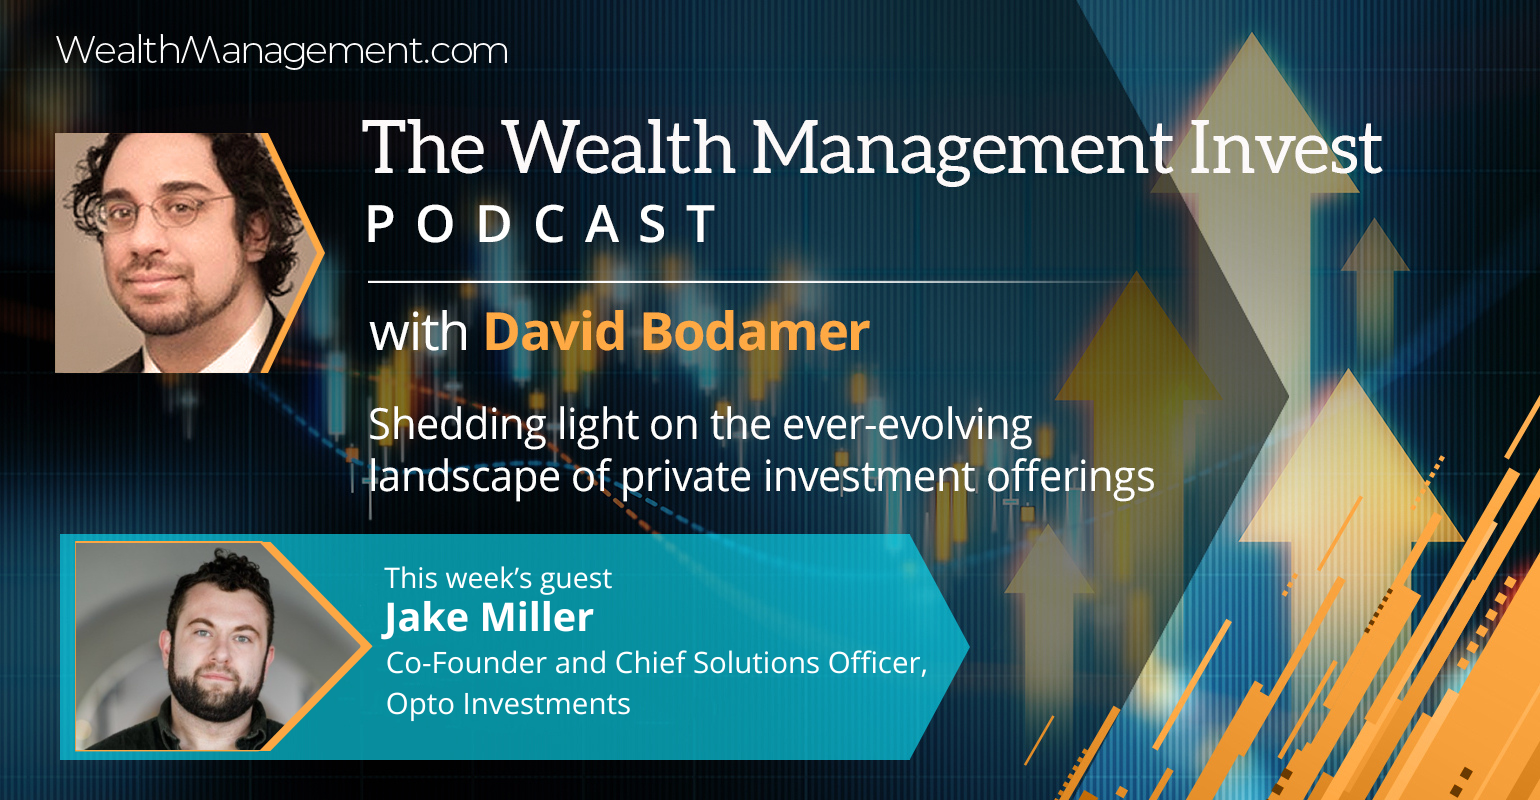 Wealth Management Invest Podcast Jake Miller Opto Investments private markets alternative investments